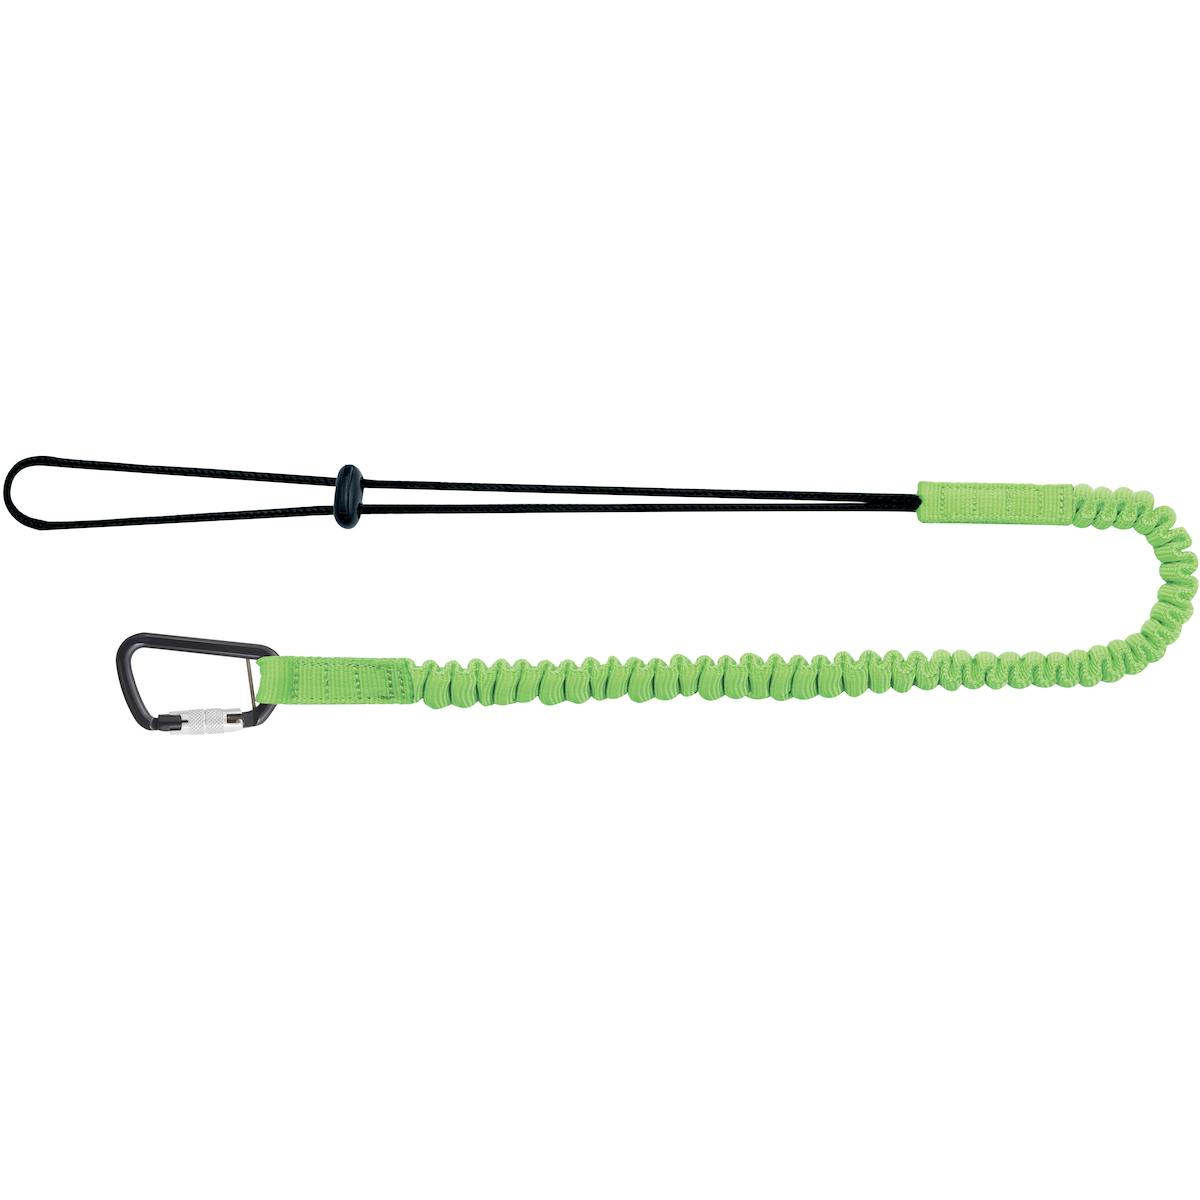 Tool Tethering Kit - includes single leg lanyard, tool connectors, and tool tape - Retail Packed, Green (533-900101) - OS